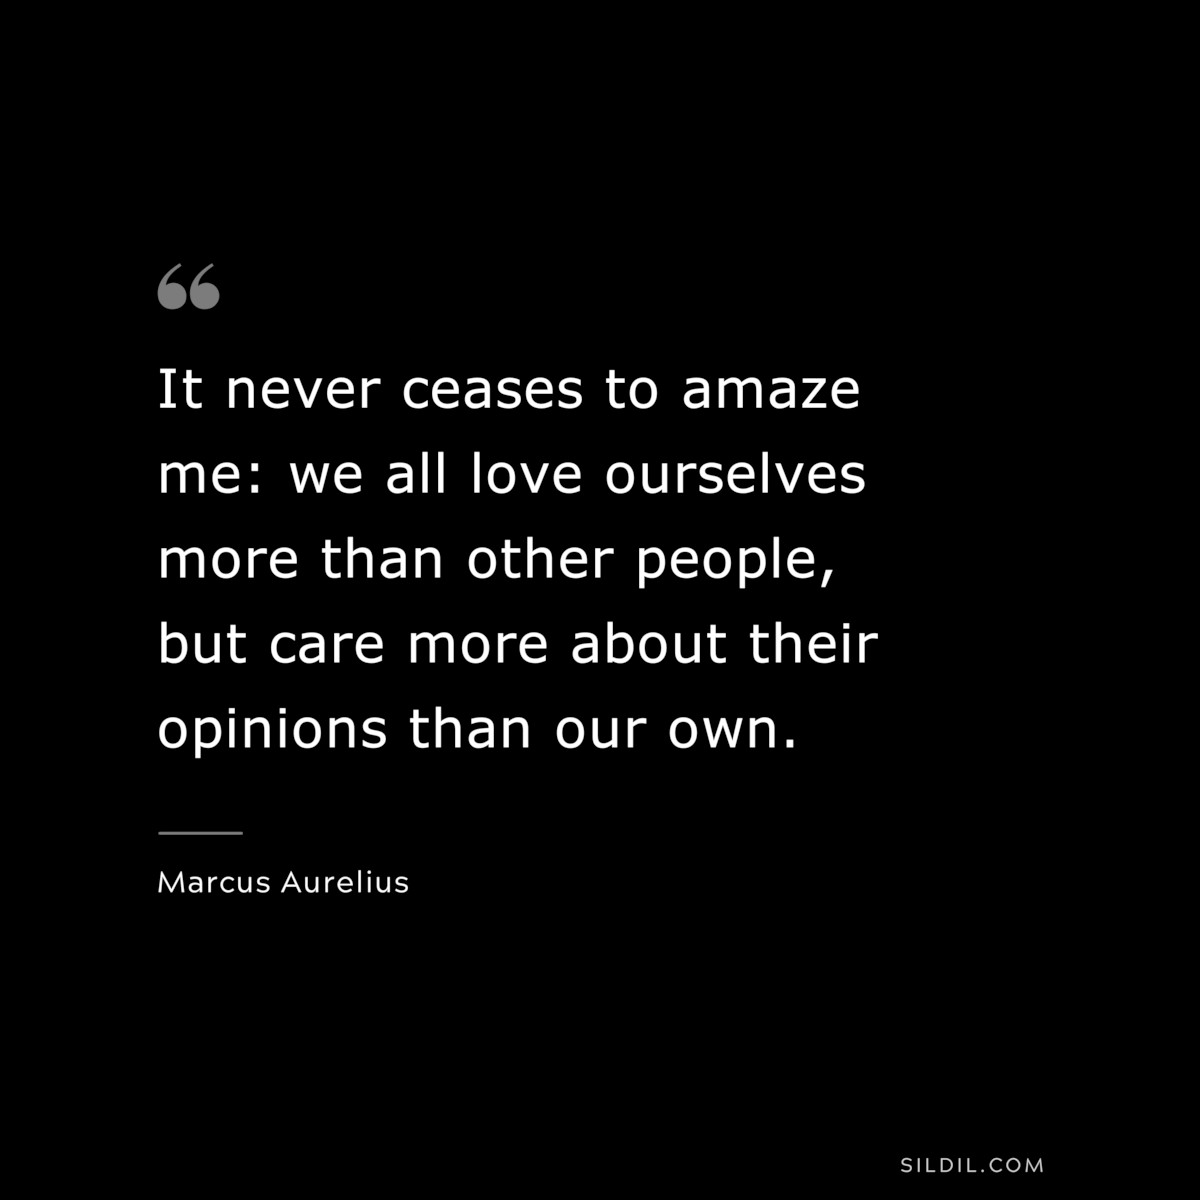 It never ceases to amaze me: we all love ourselves more than other people, but care more about their opinions than our own. ― Marcus Aurelius